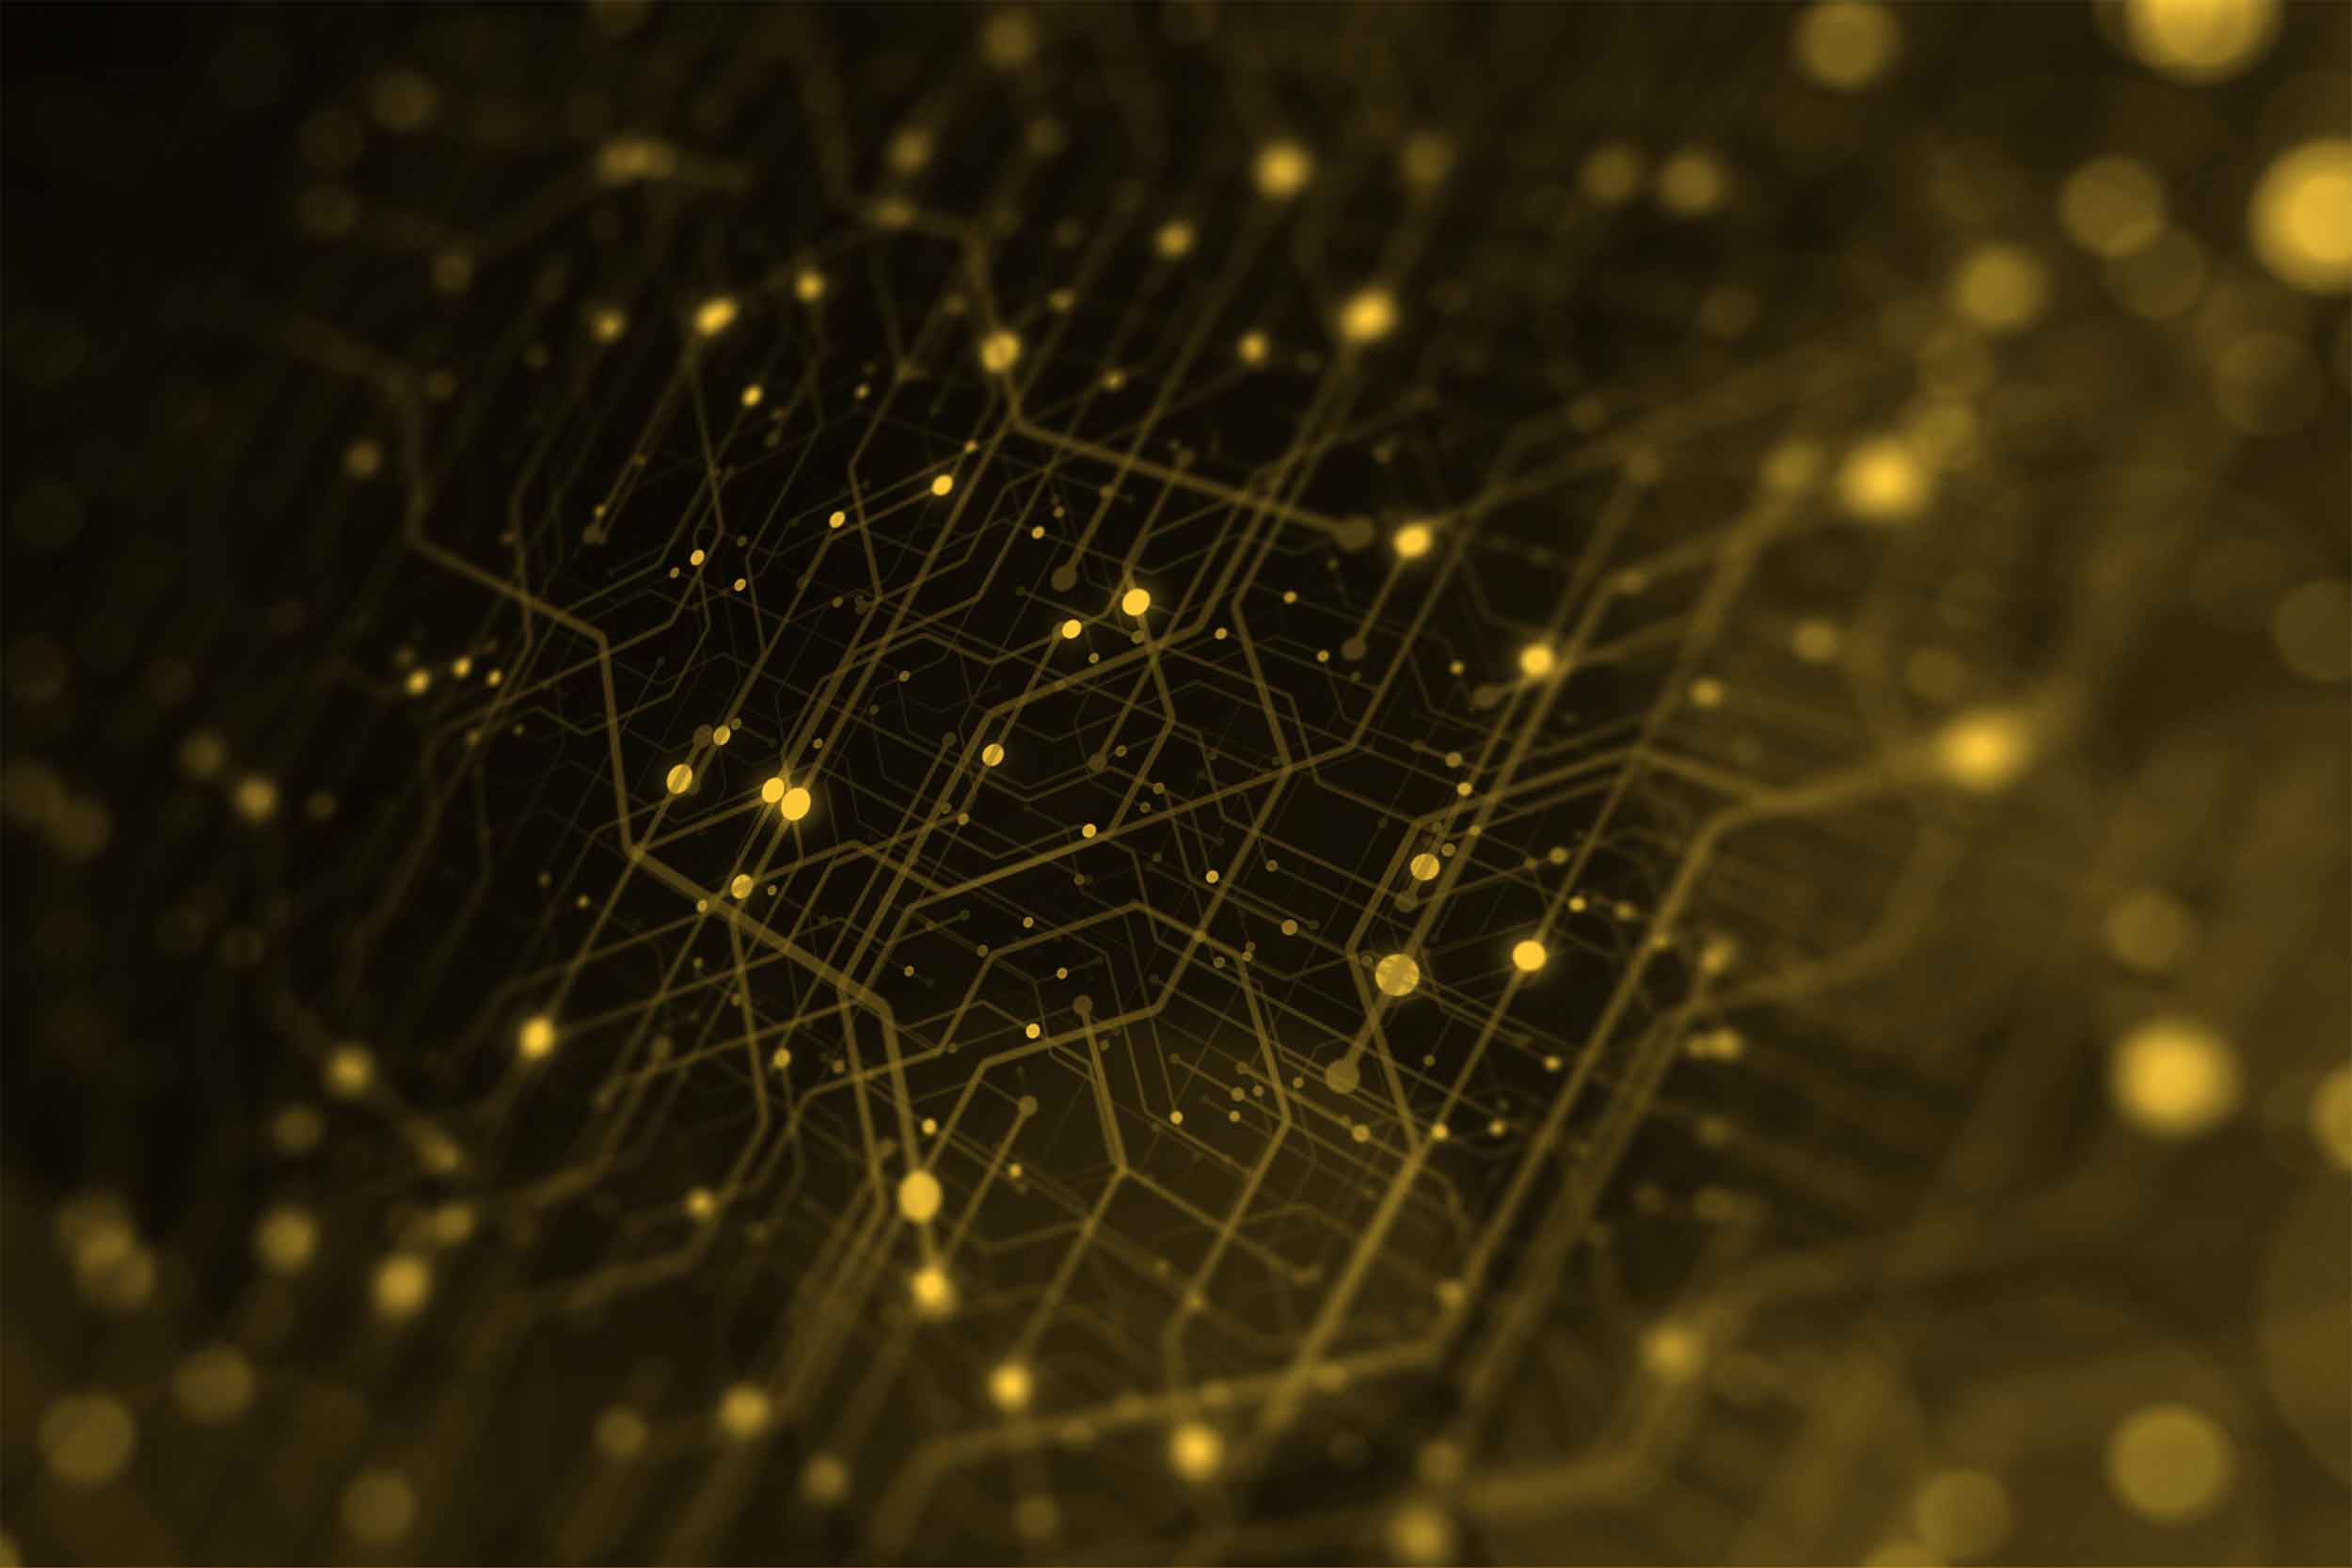 stylized background image of electronic circuitry and sparkles